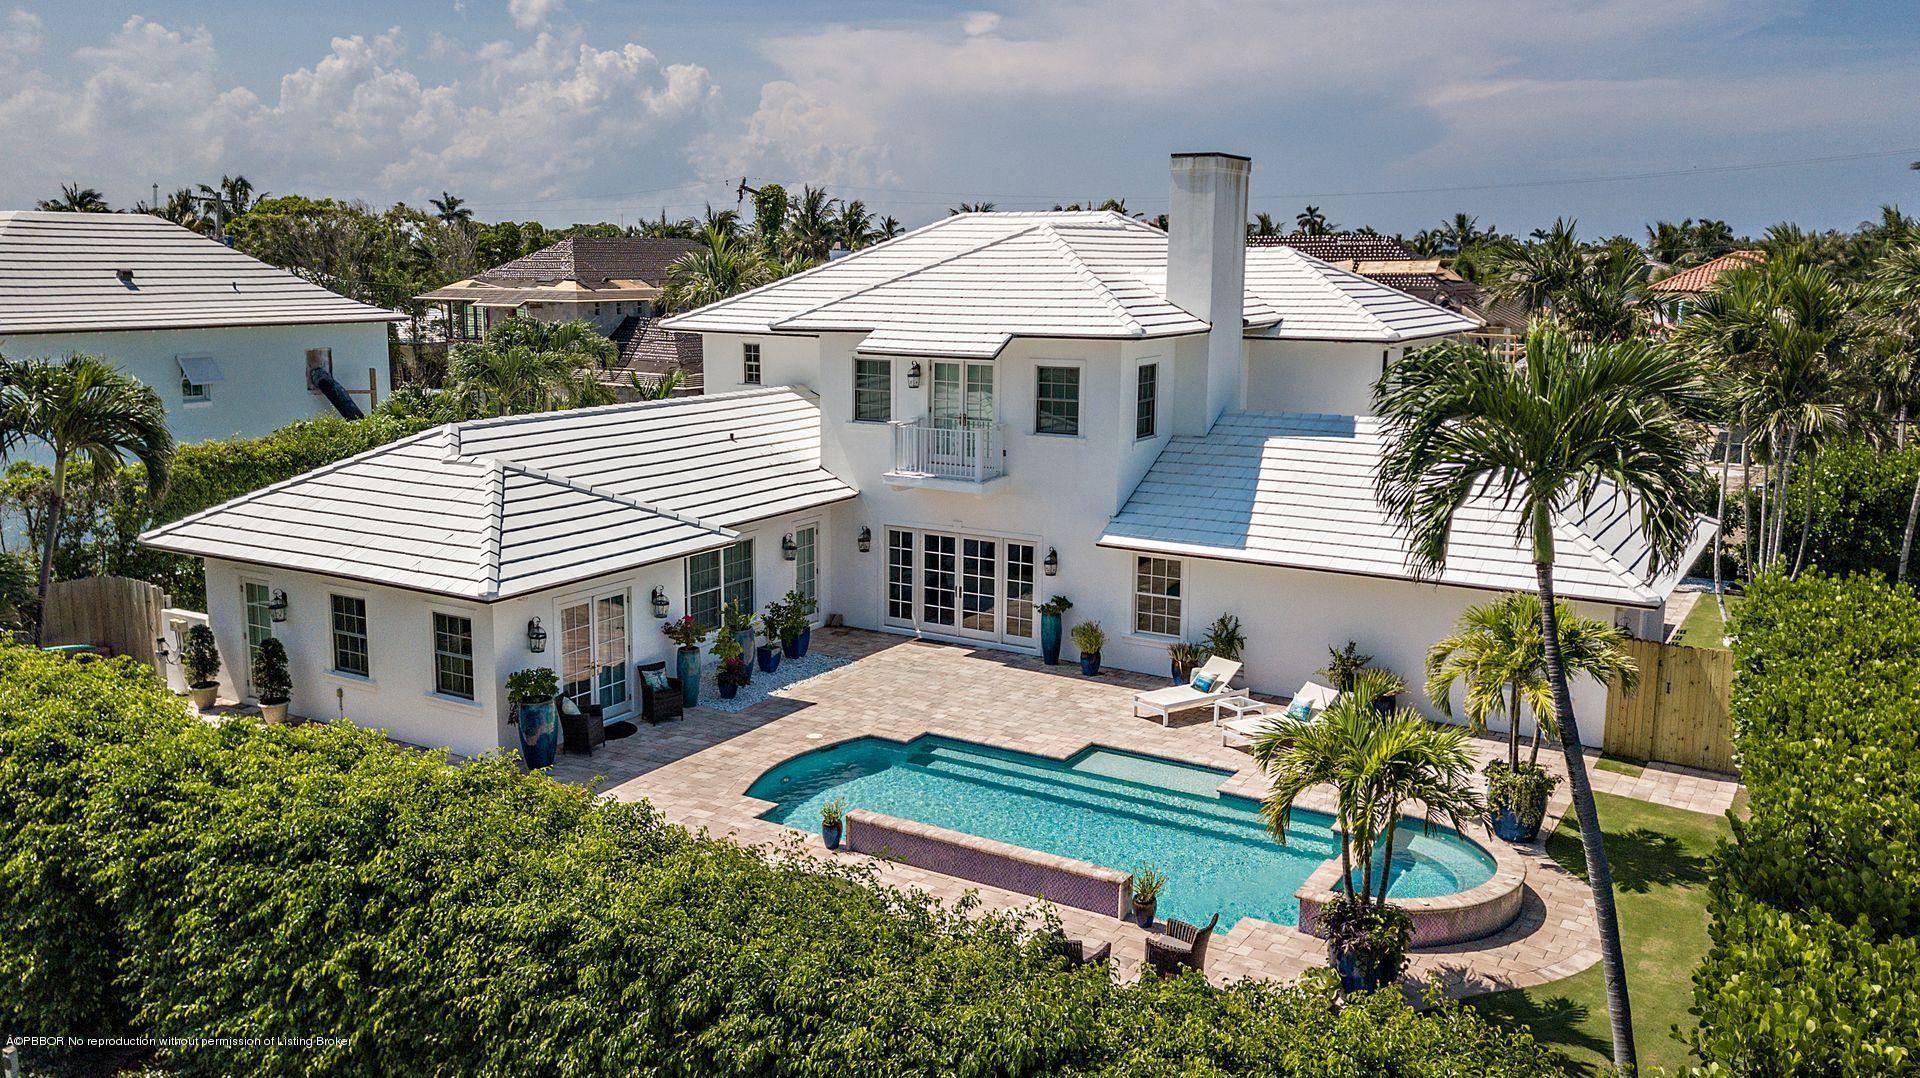 Lovely home built in 2015 situated on a private lot with a high elevation on coveted Ocean Terrace in the North End of Palm Beach, just a few homes from ...